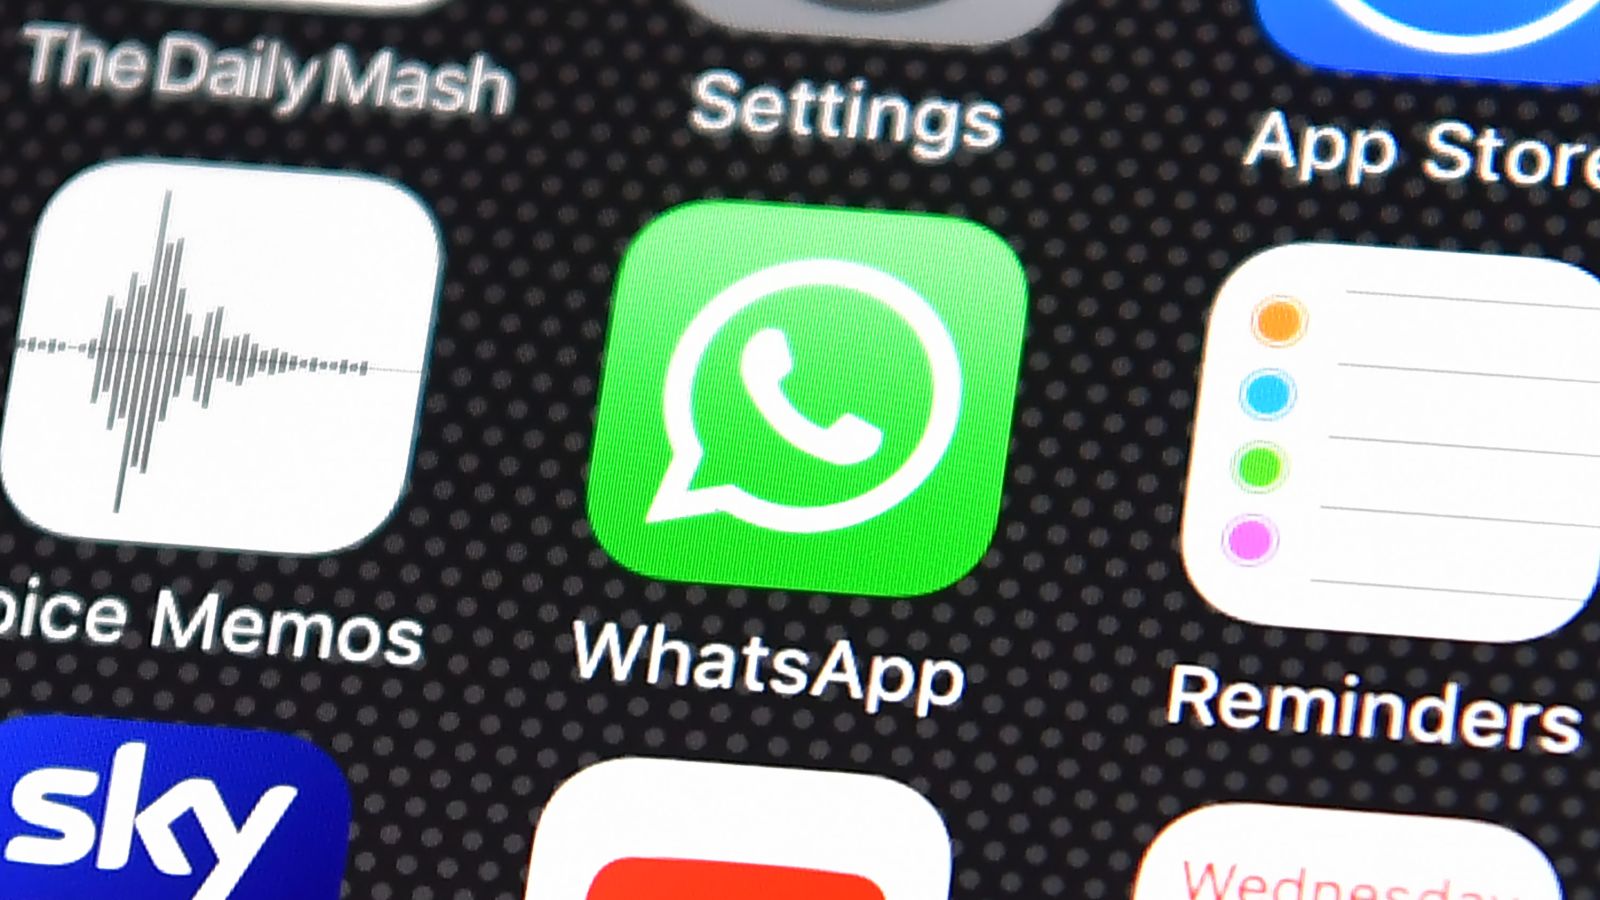 WhatsApp Hacked! But how?